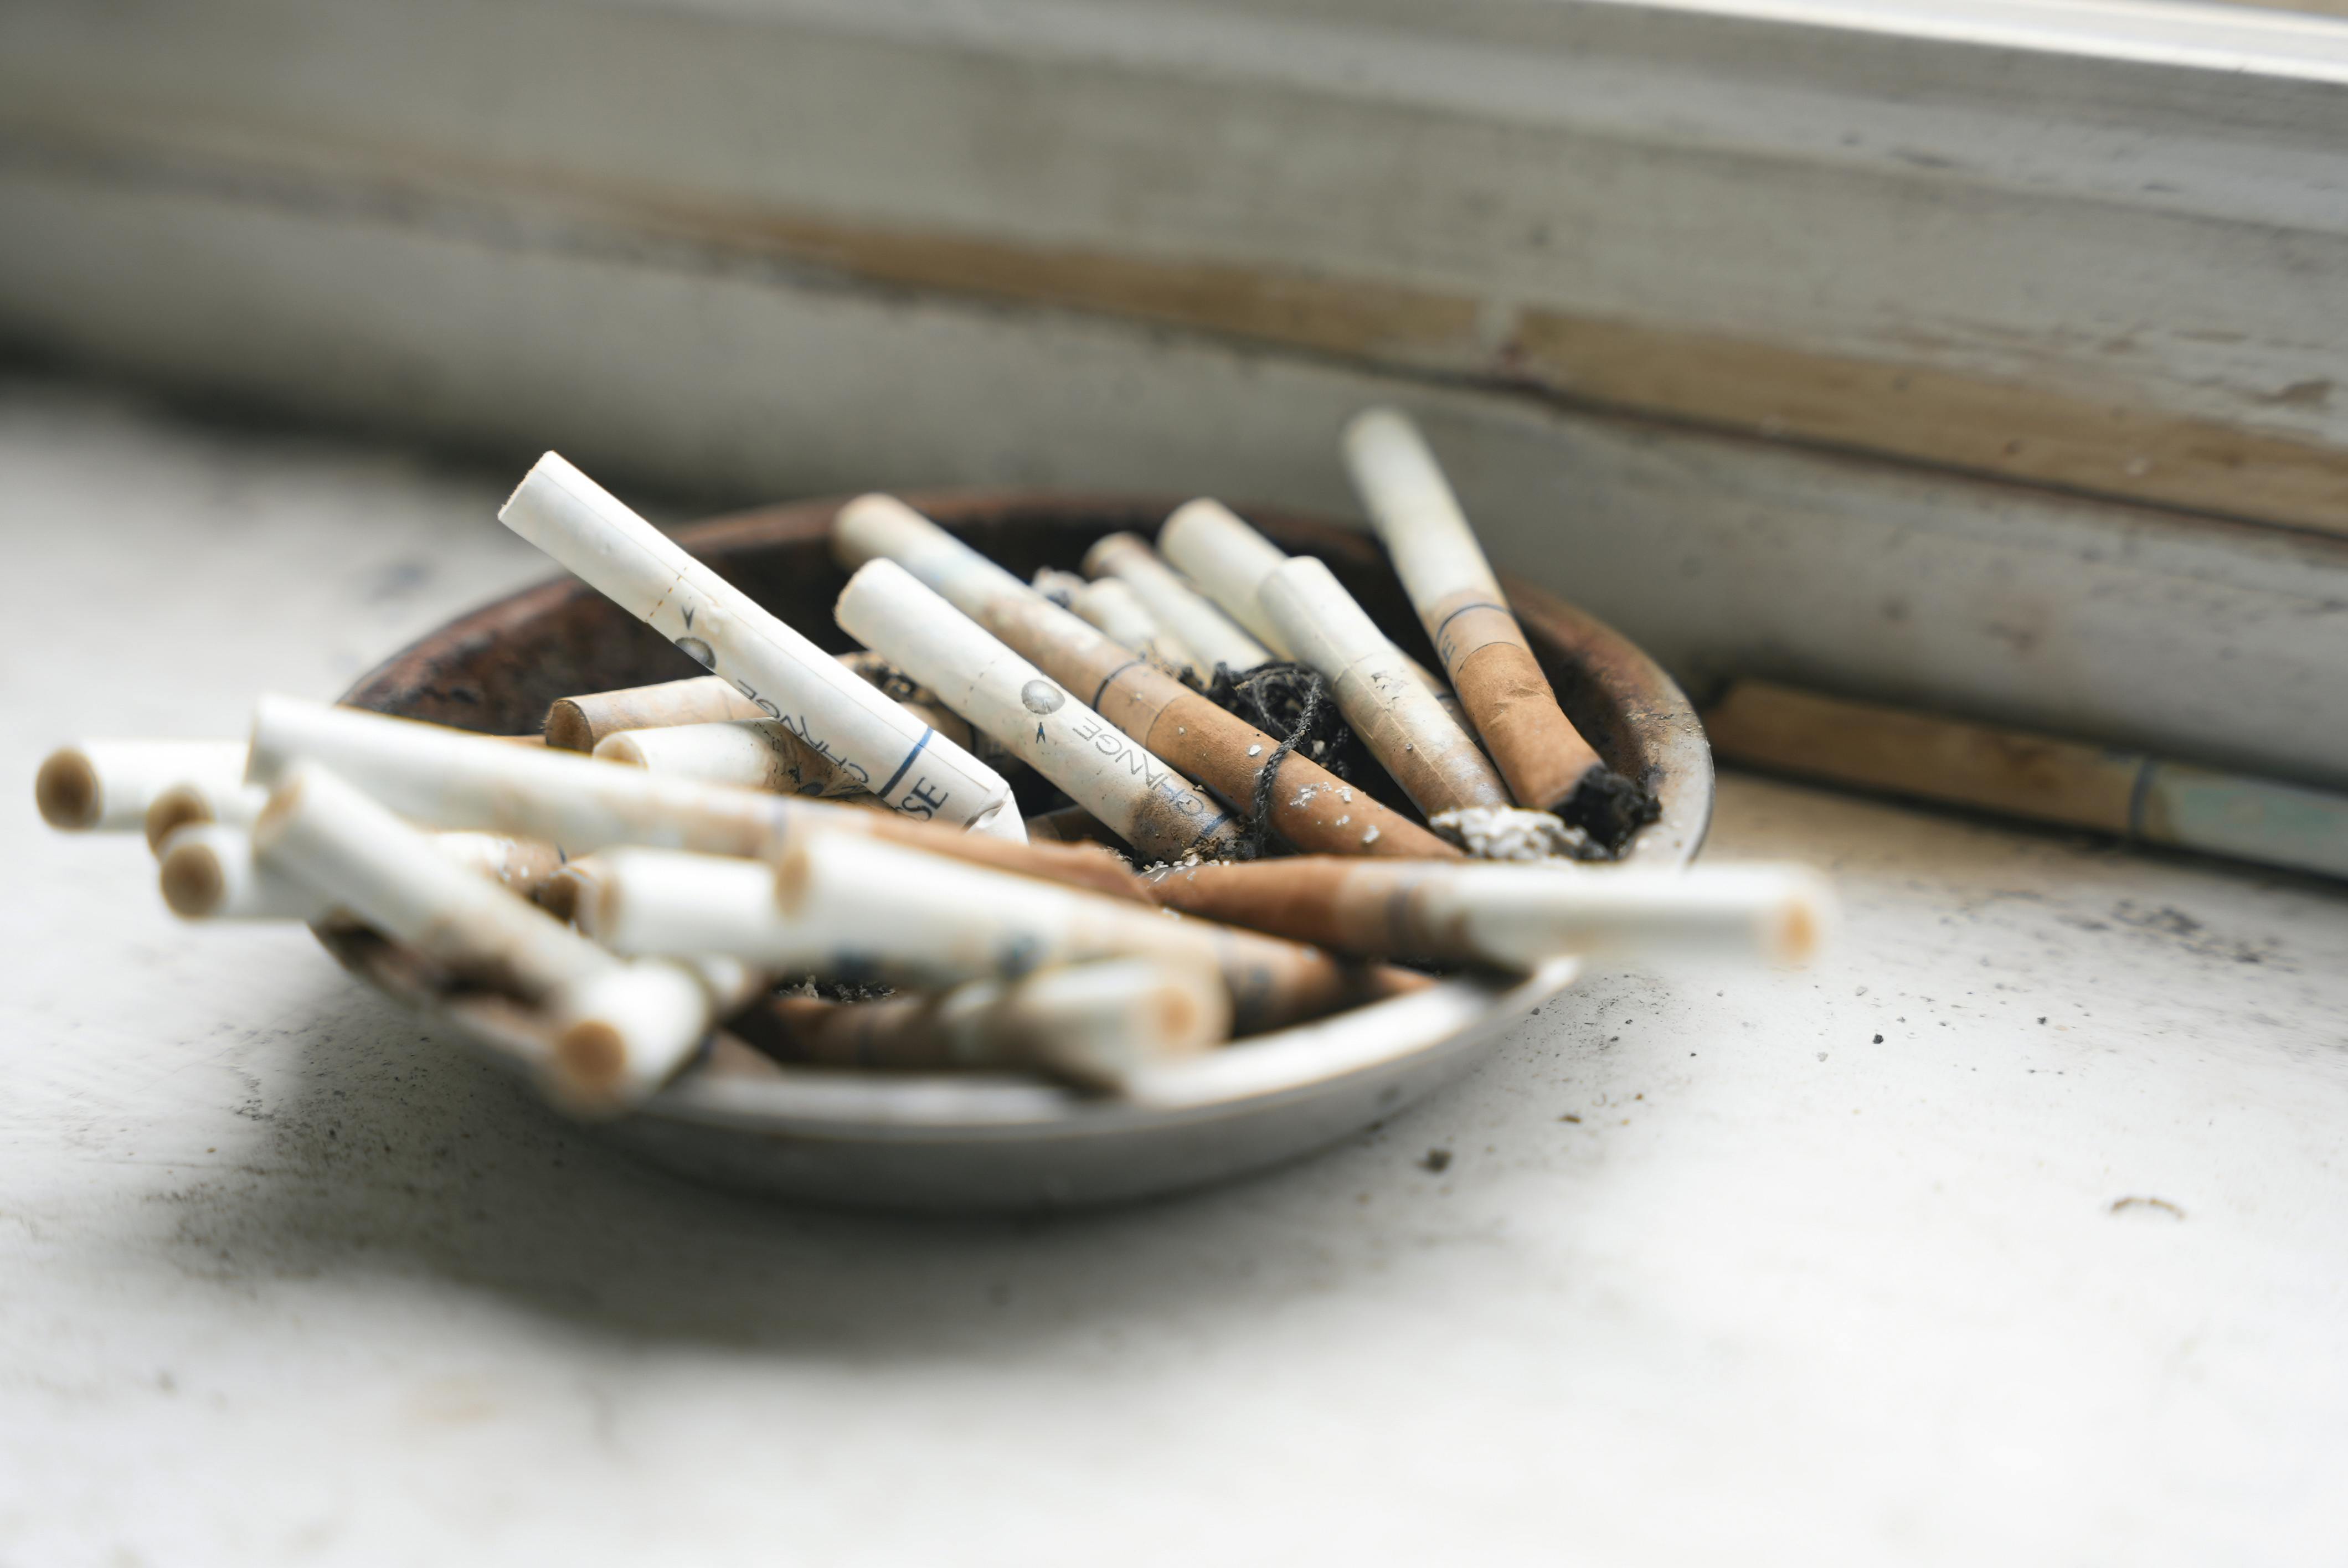 Cigarette Butts on Round Steel Ashtray · Free Stock Photo